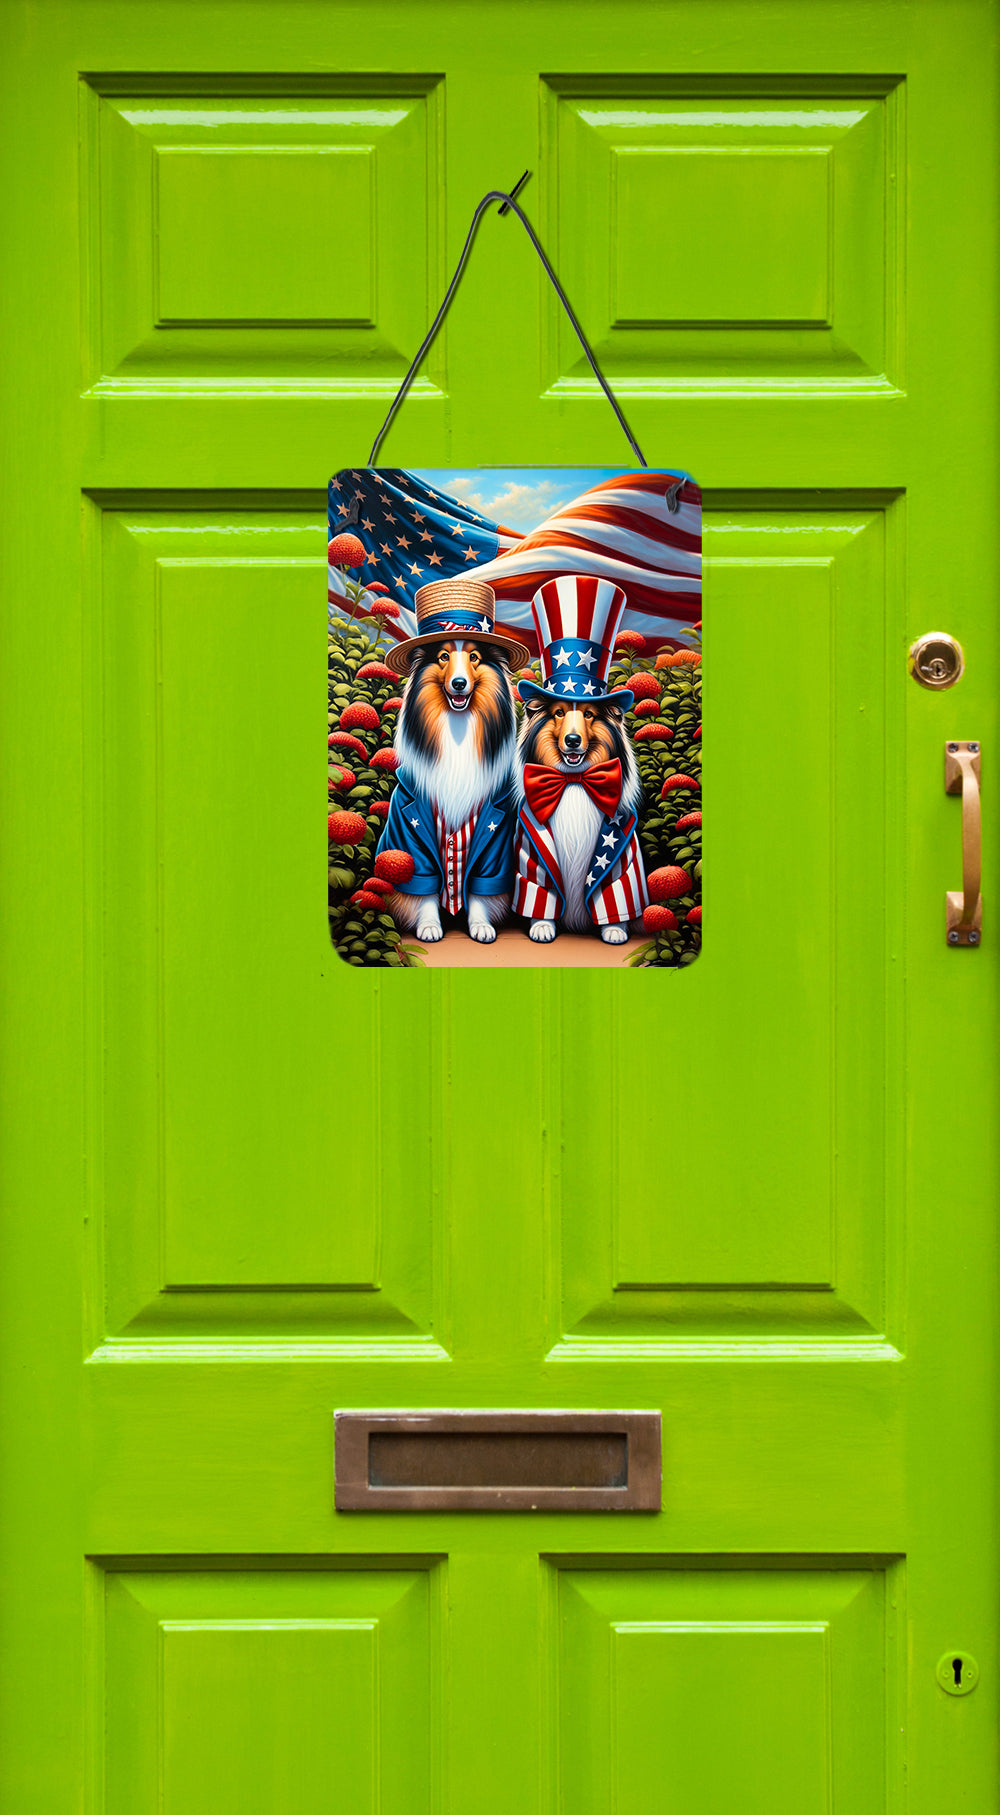 Buy this All American Sheltie Wall or Door Hanging Prints